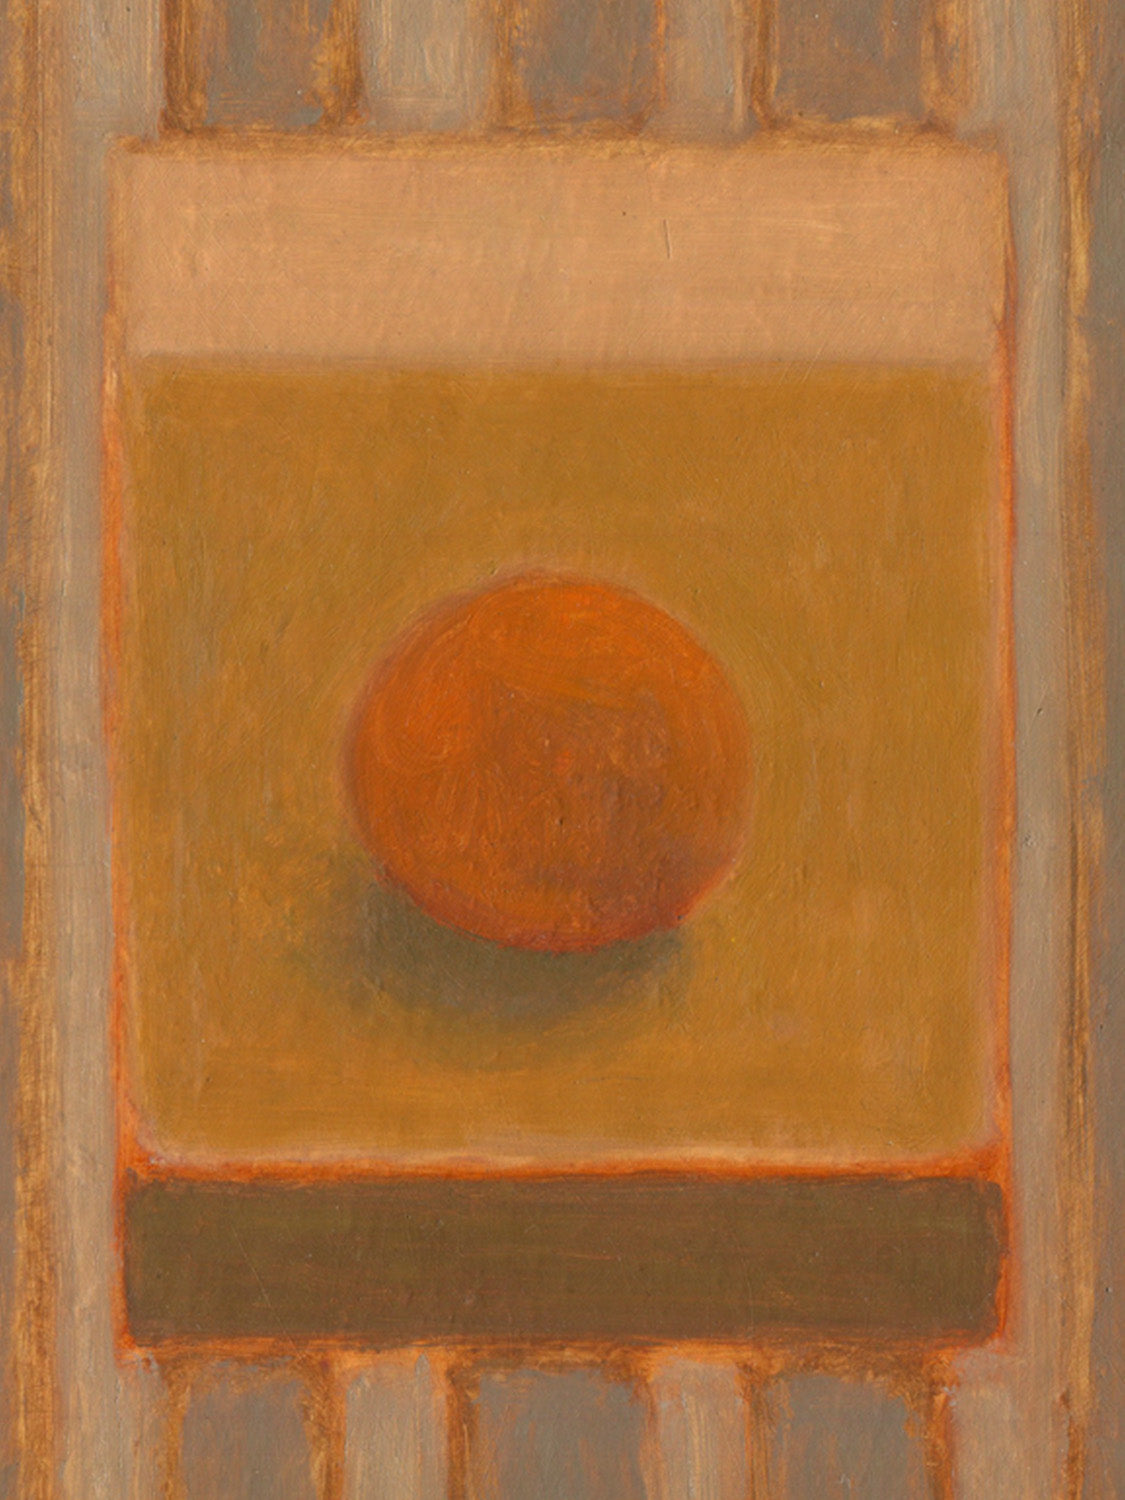 Painting of an Orange on a Wall #2